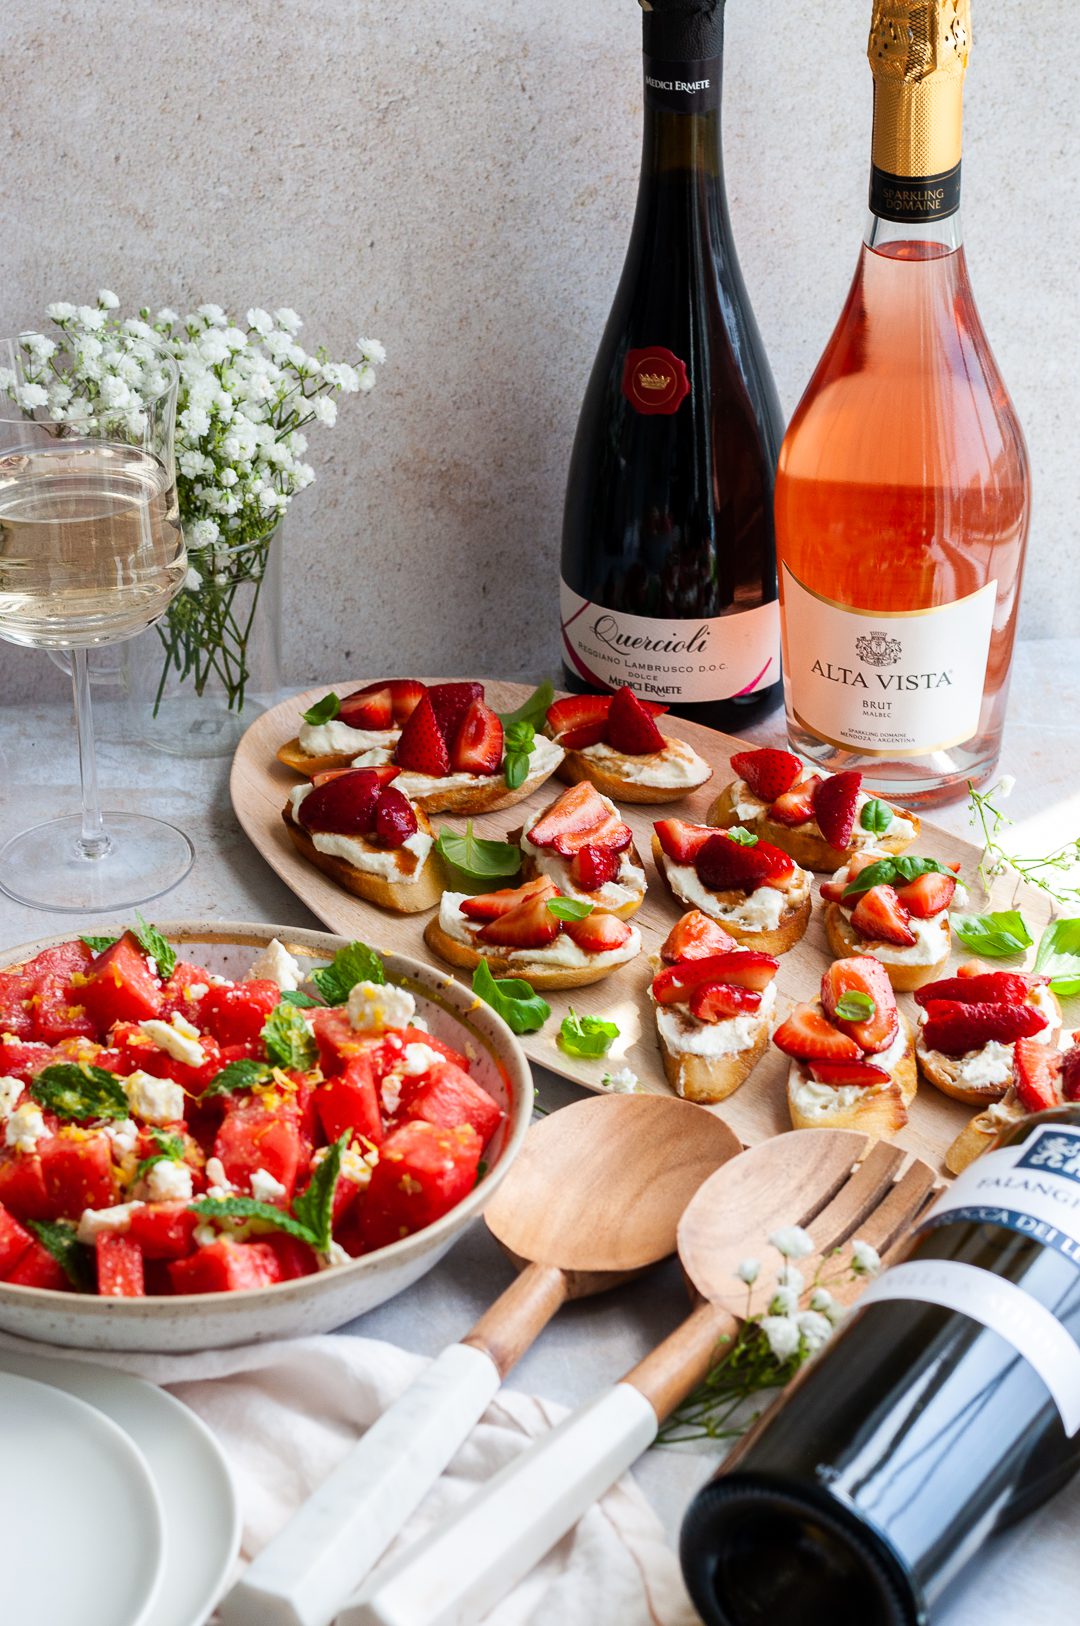 Red and rose sparkling wine bottles next to summer salads